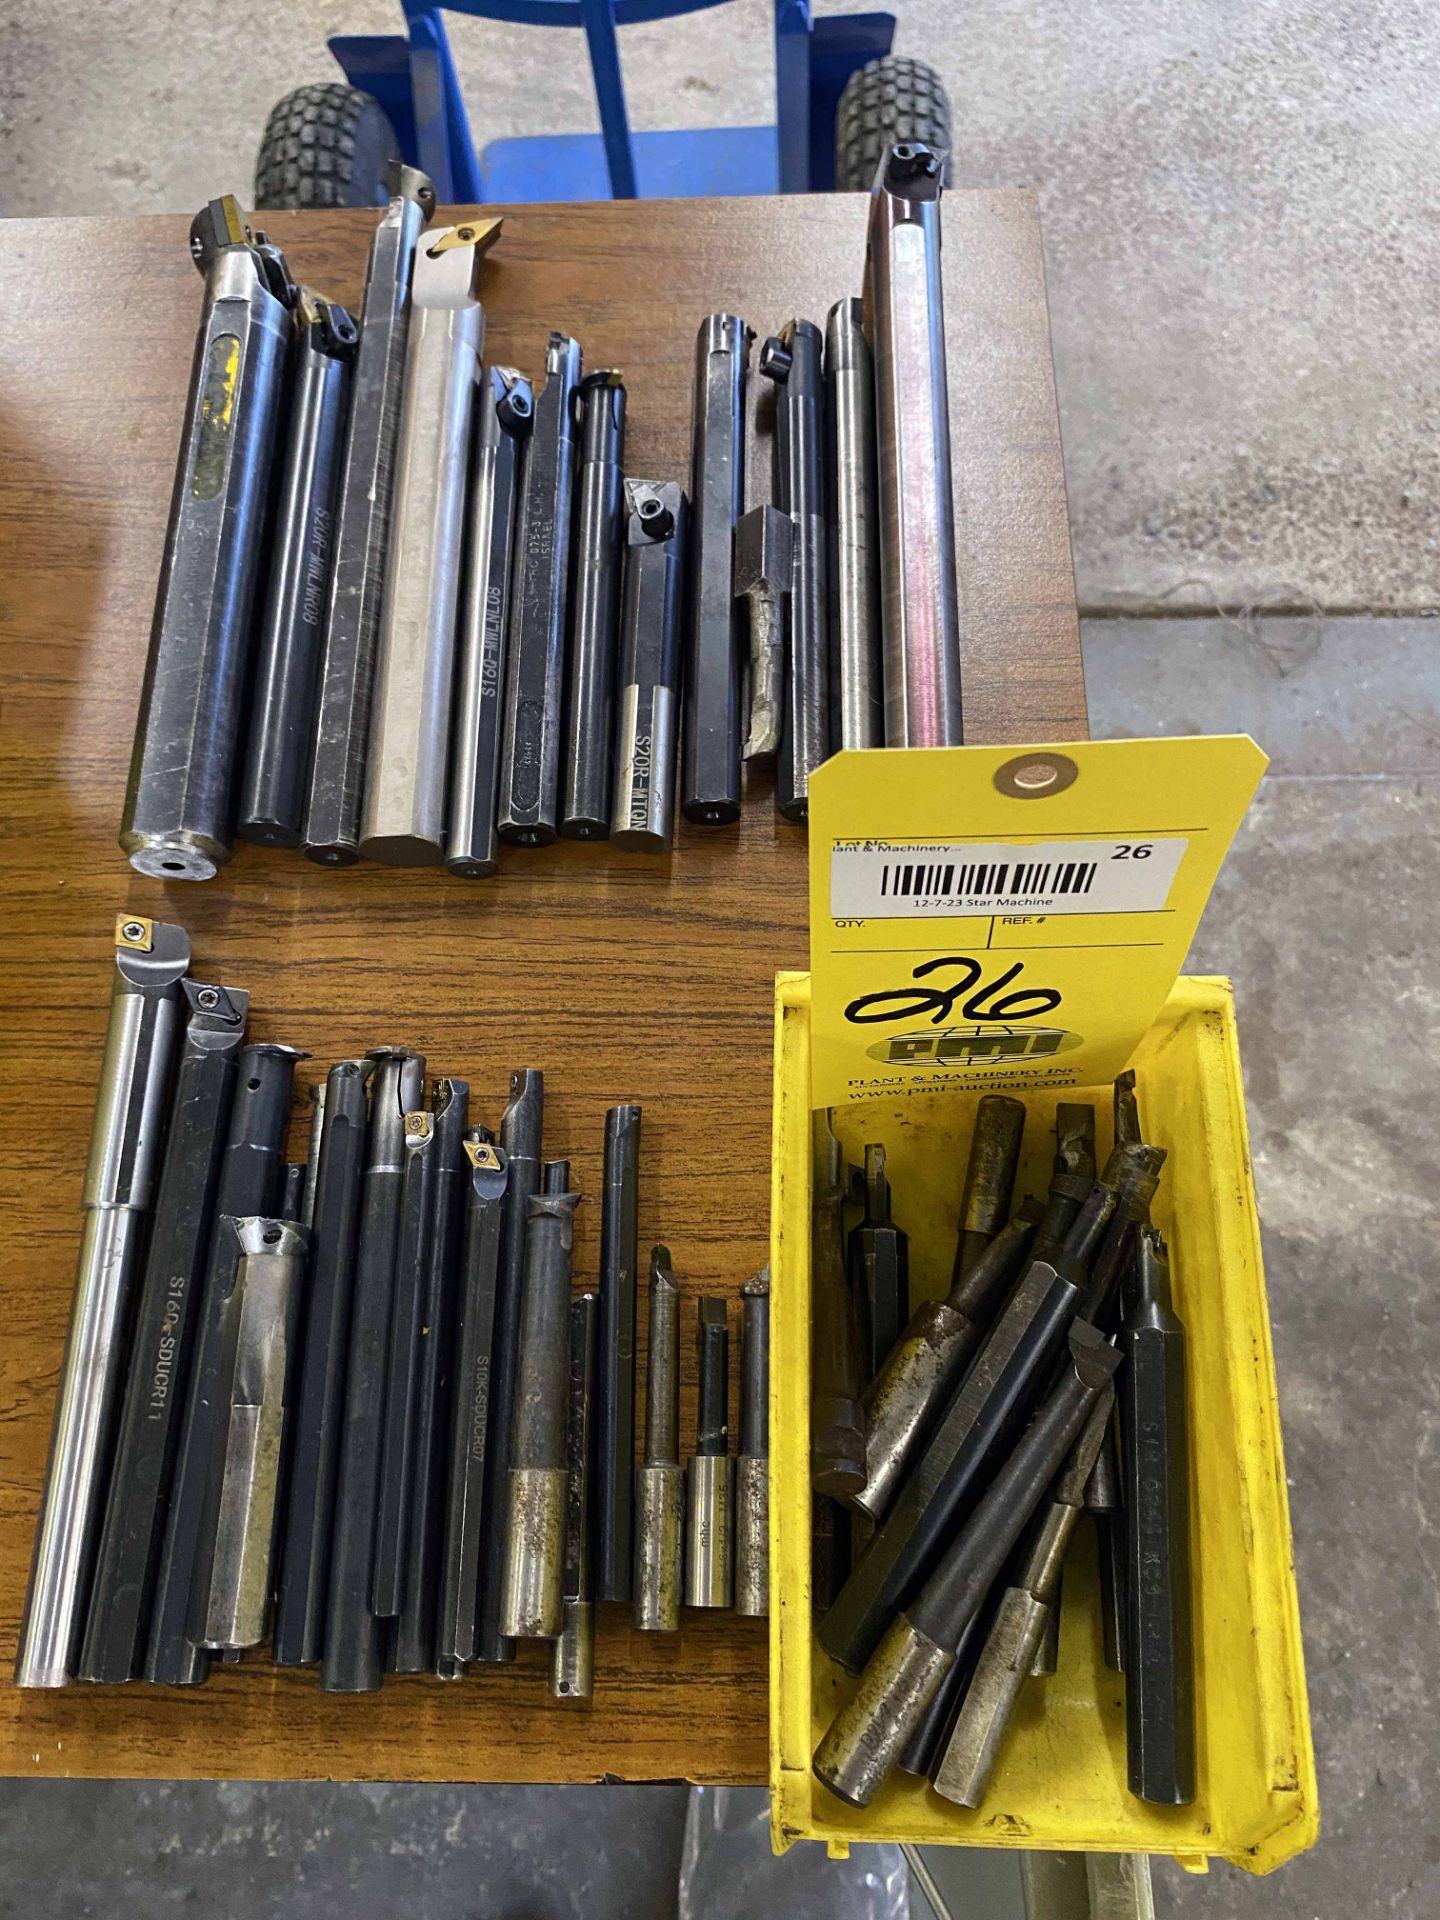 LOT OF INSERT BORING BARS (Located at: Star Machine Works, 150 Robin Dr., Livingston, TX 77351)